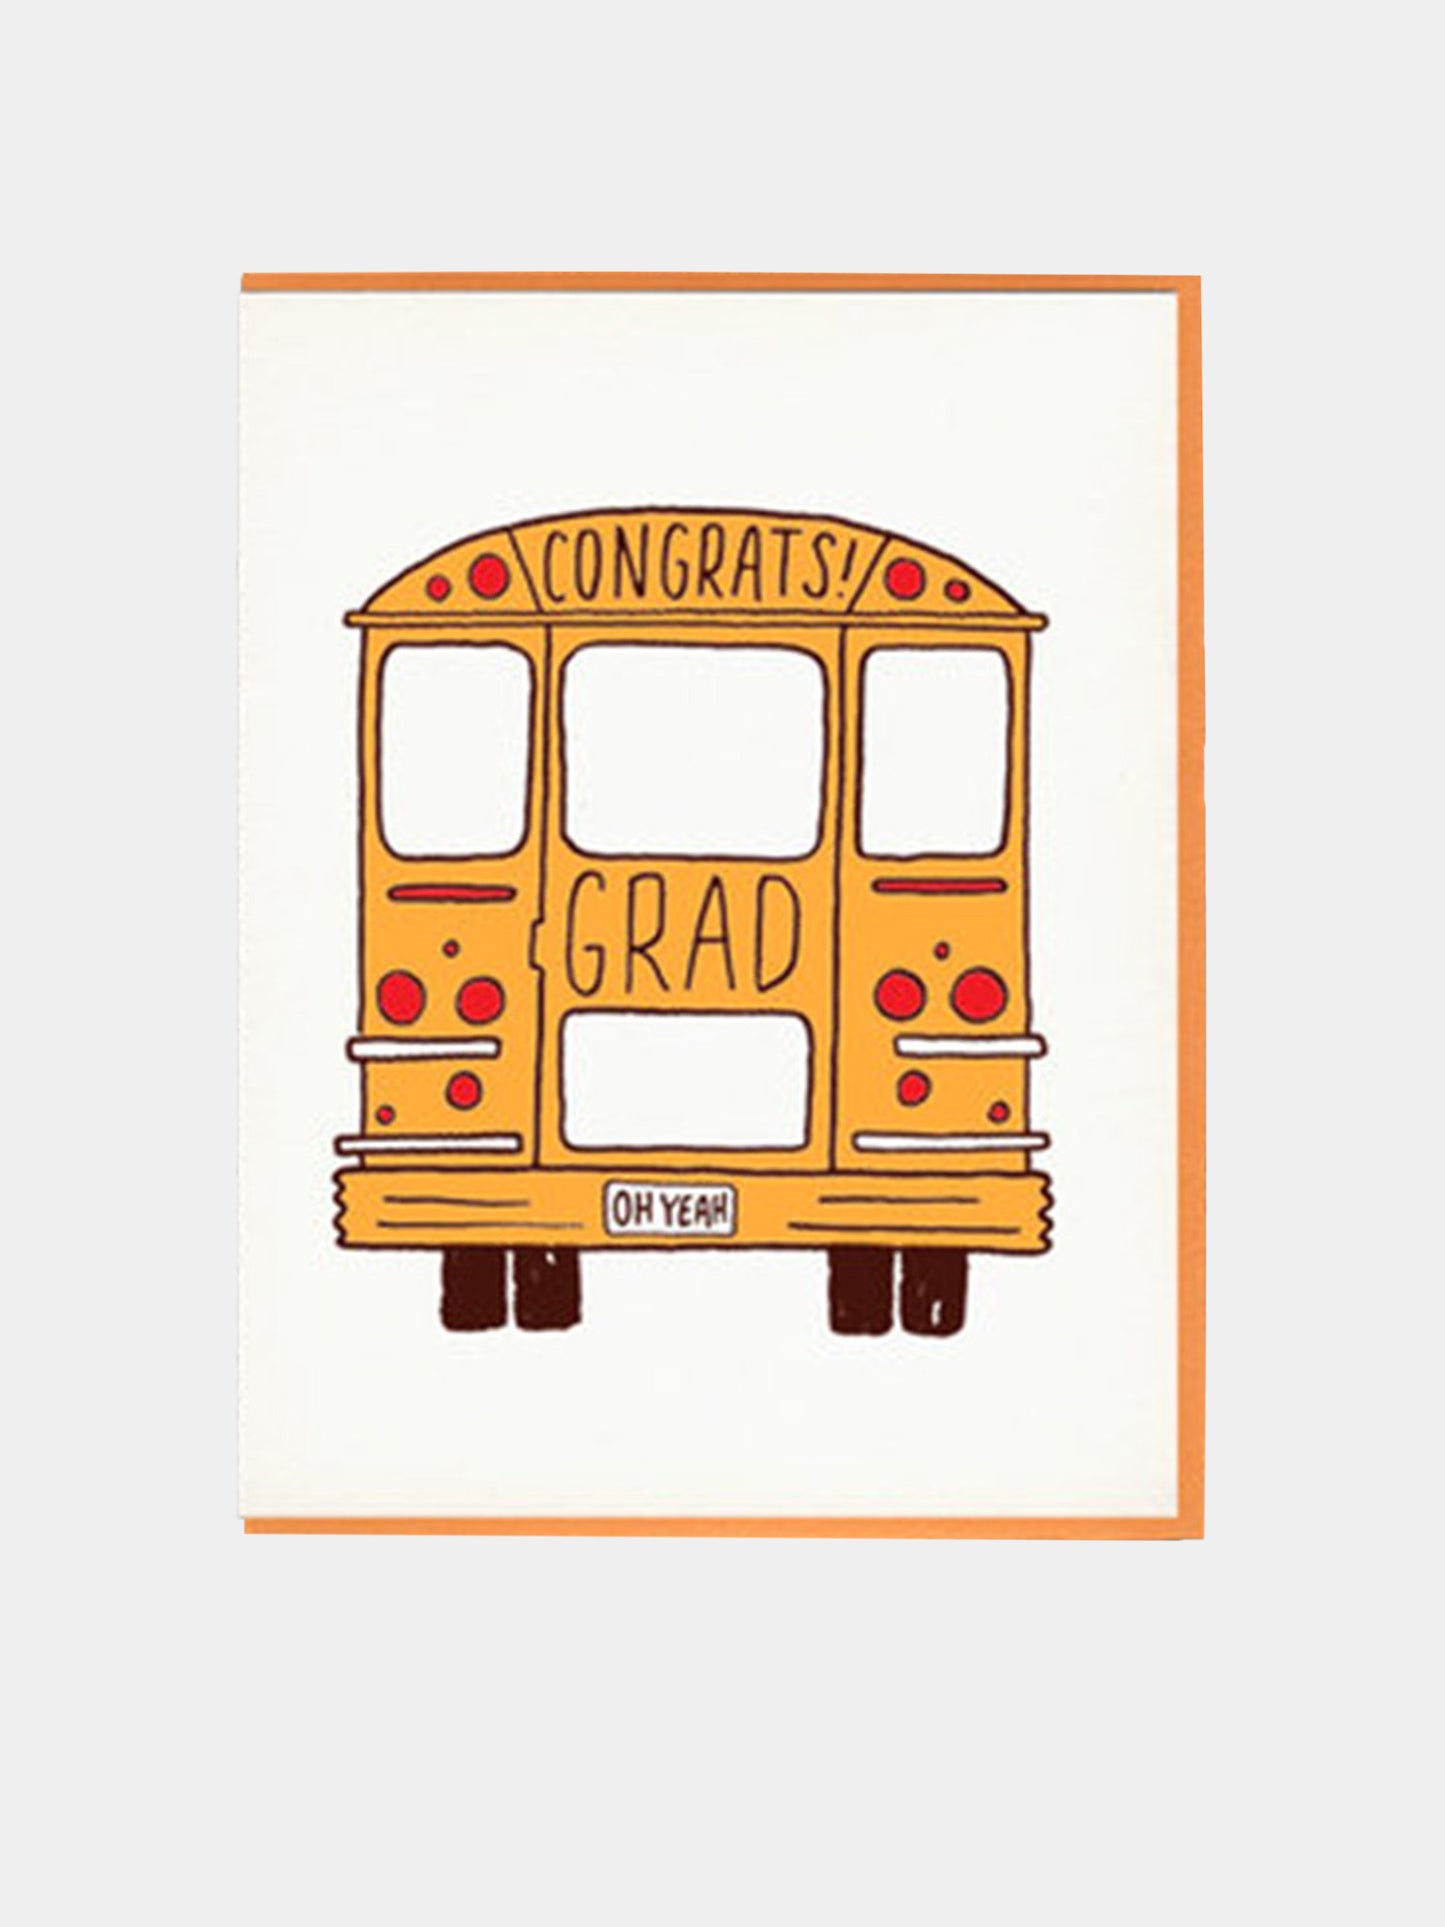 Bench Pressed Congrats Bus Greeting Card